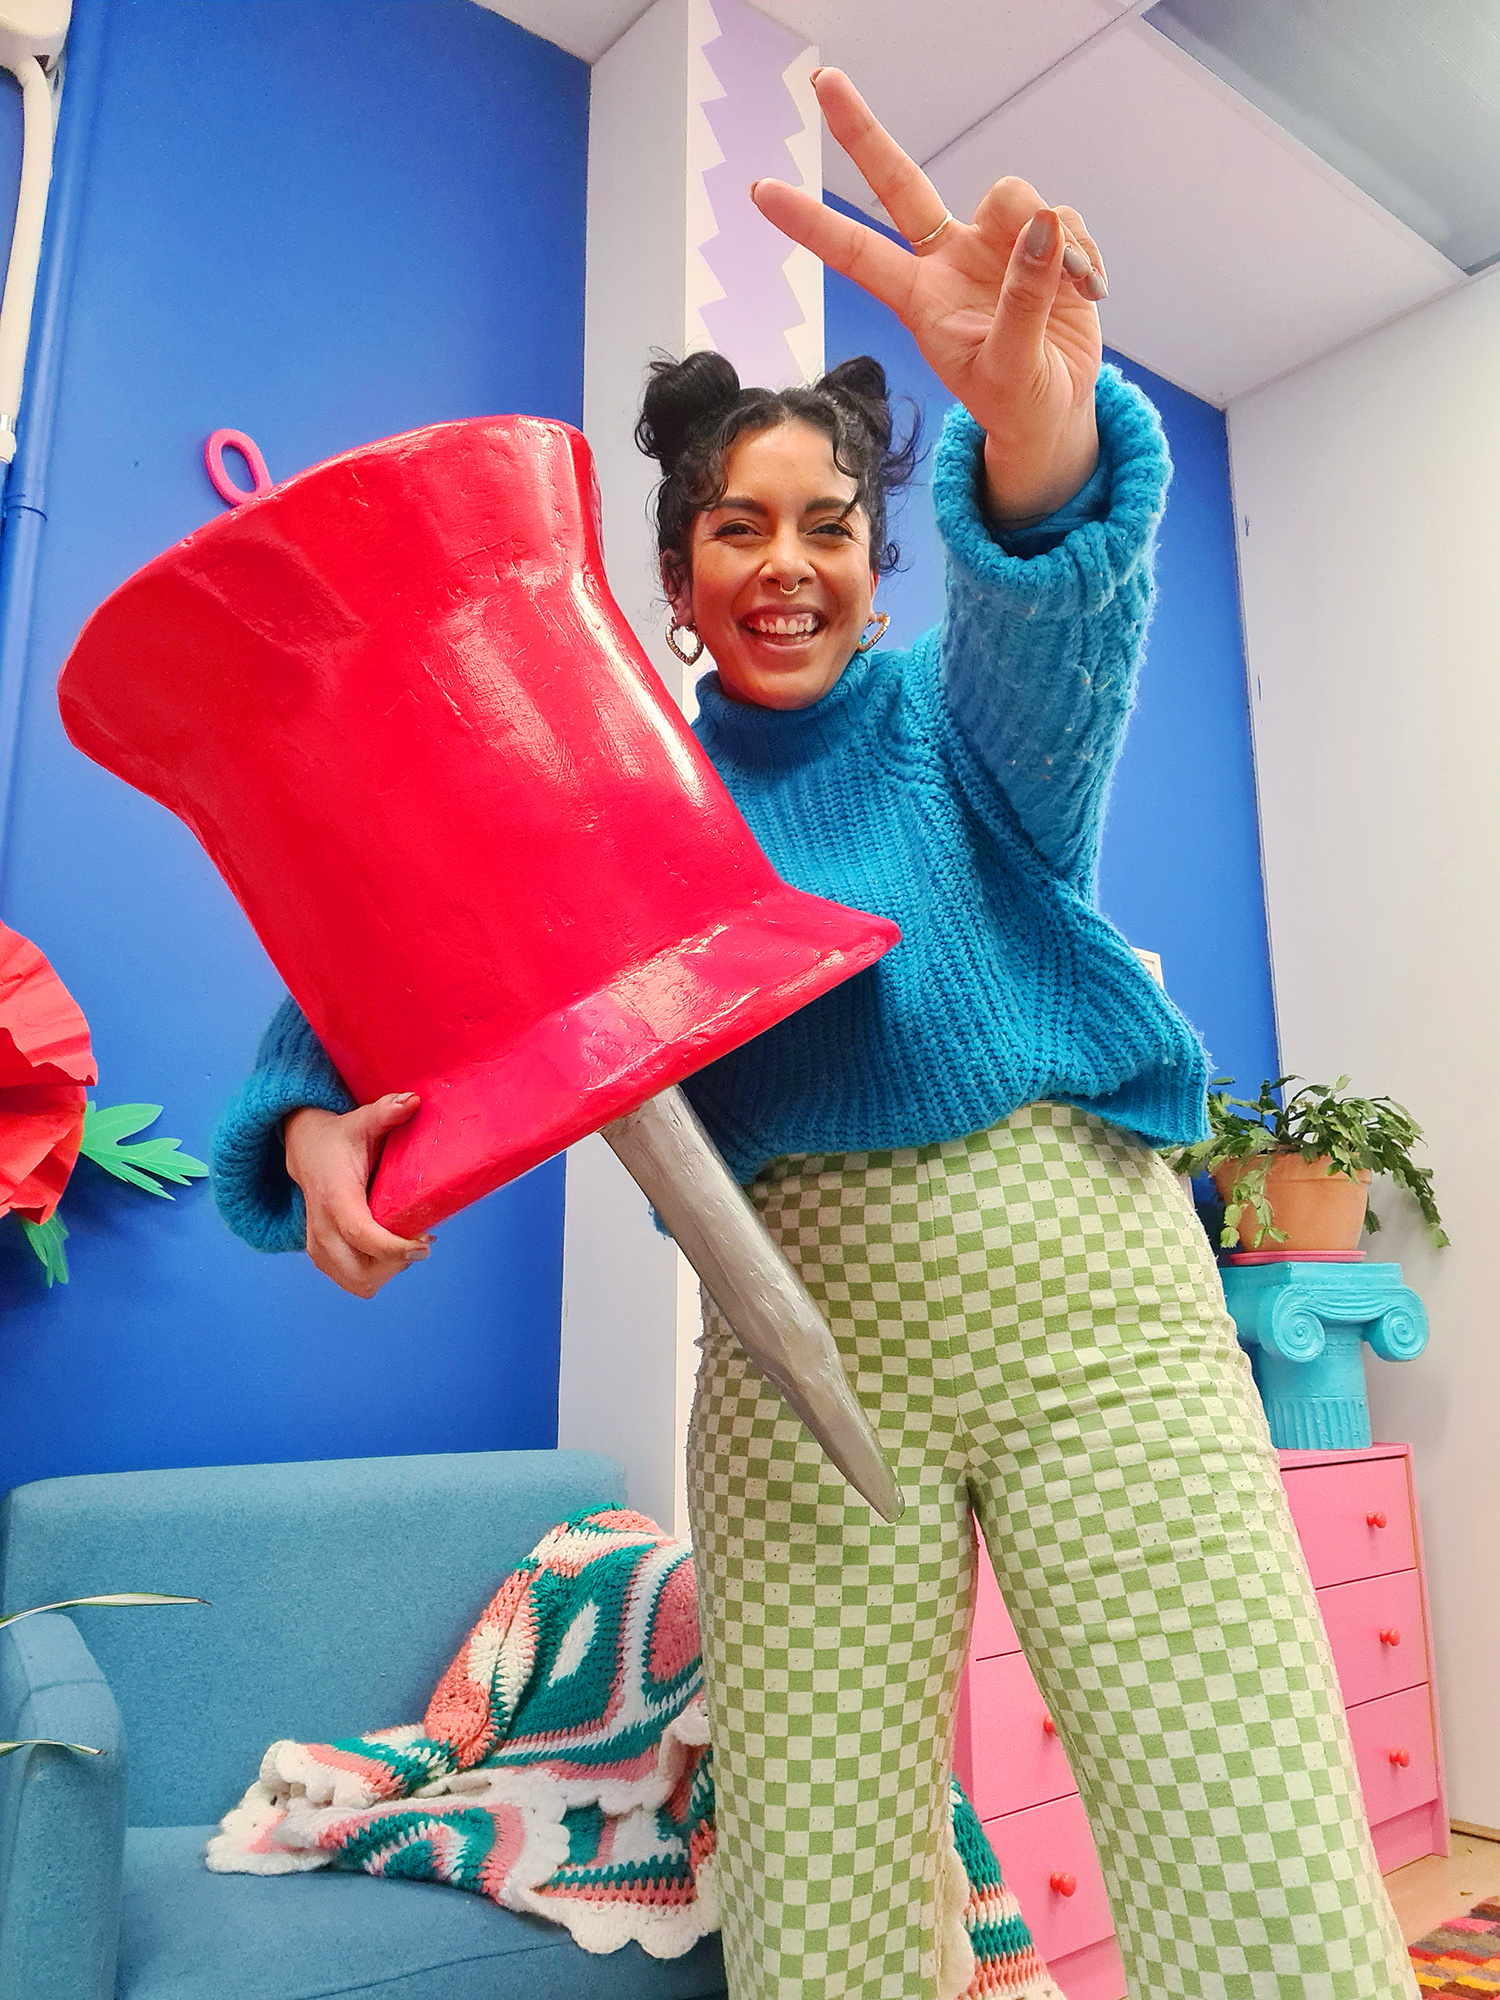  Kitiya, a woman of colour with black hair, a blue sweater and green checkered pants stands in her colourful art studio holding a giant, oversized red papier mâché pin/thumbtack prop, and giving a peace sign